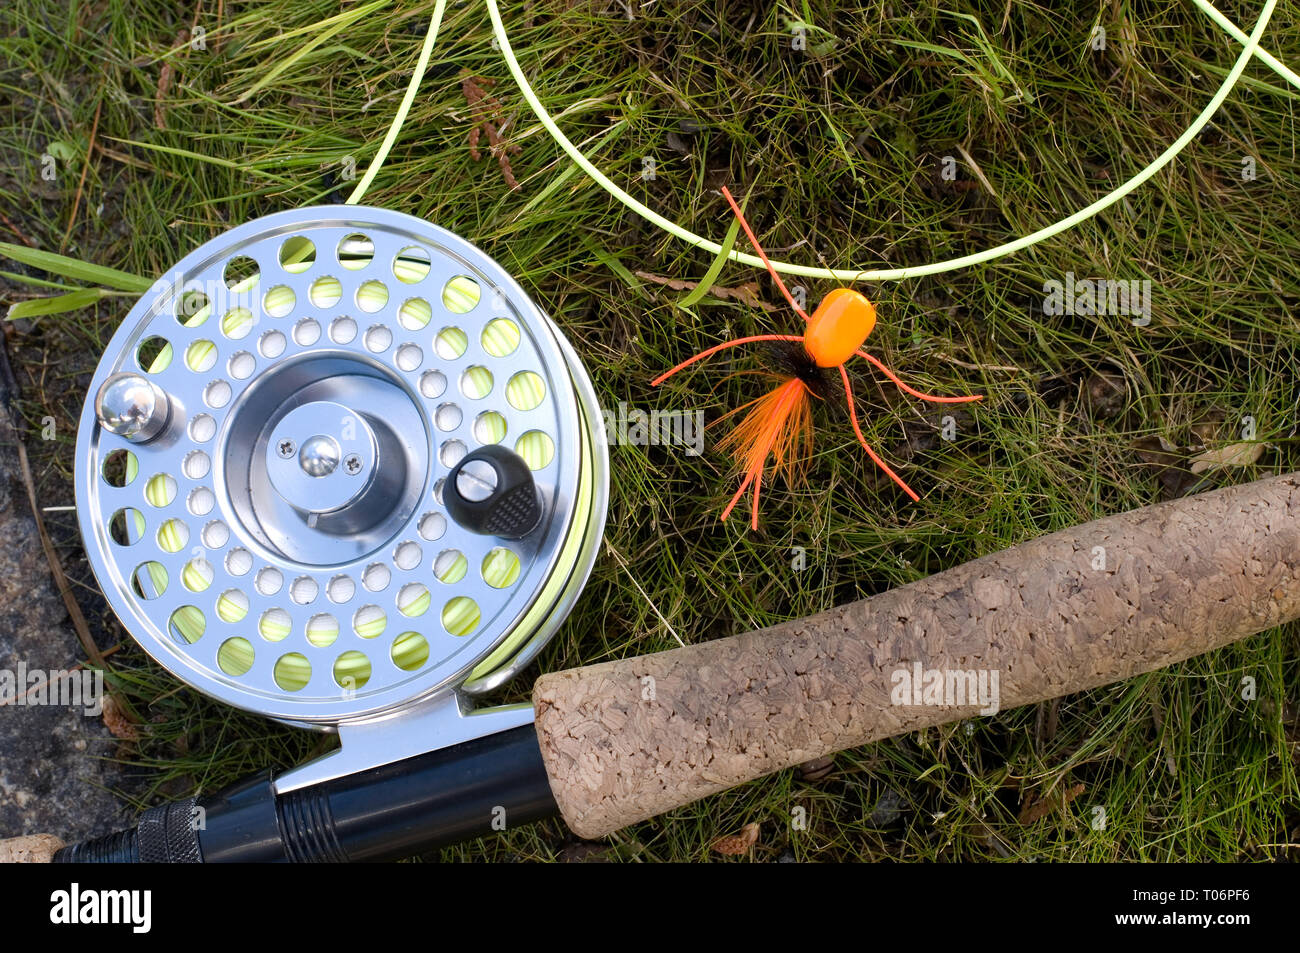 Fly fishing Rod and Reel with Orange Spider Lure on Wet Grass Stock Photo -  Alamy